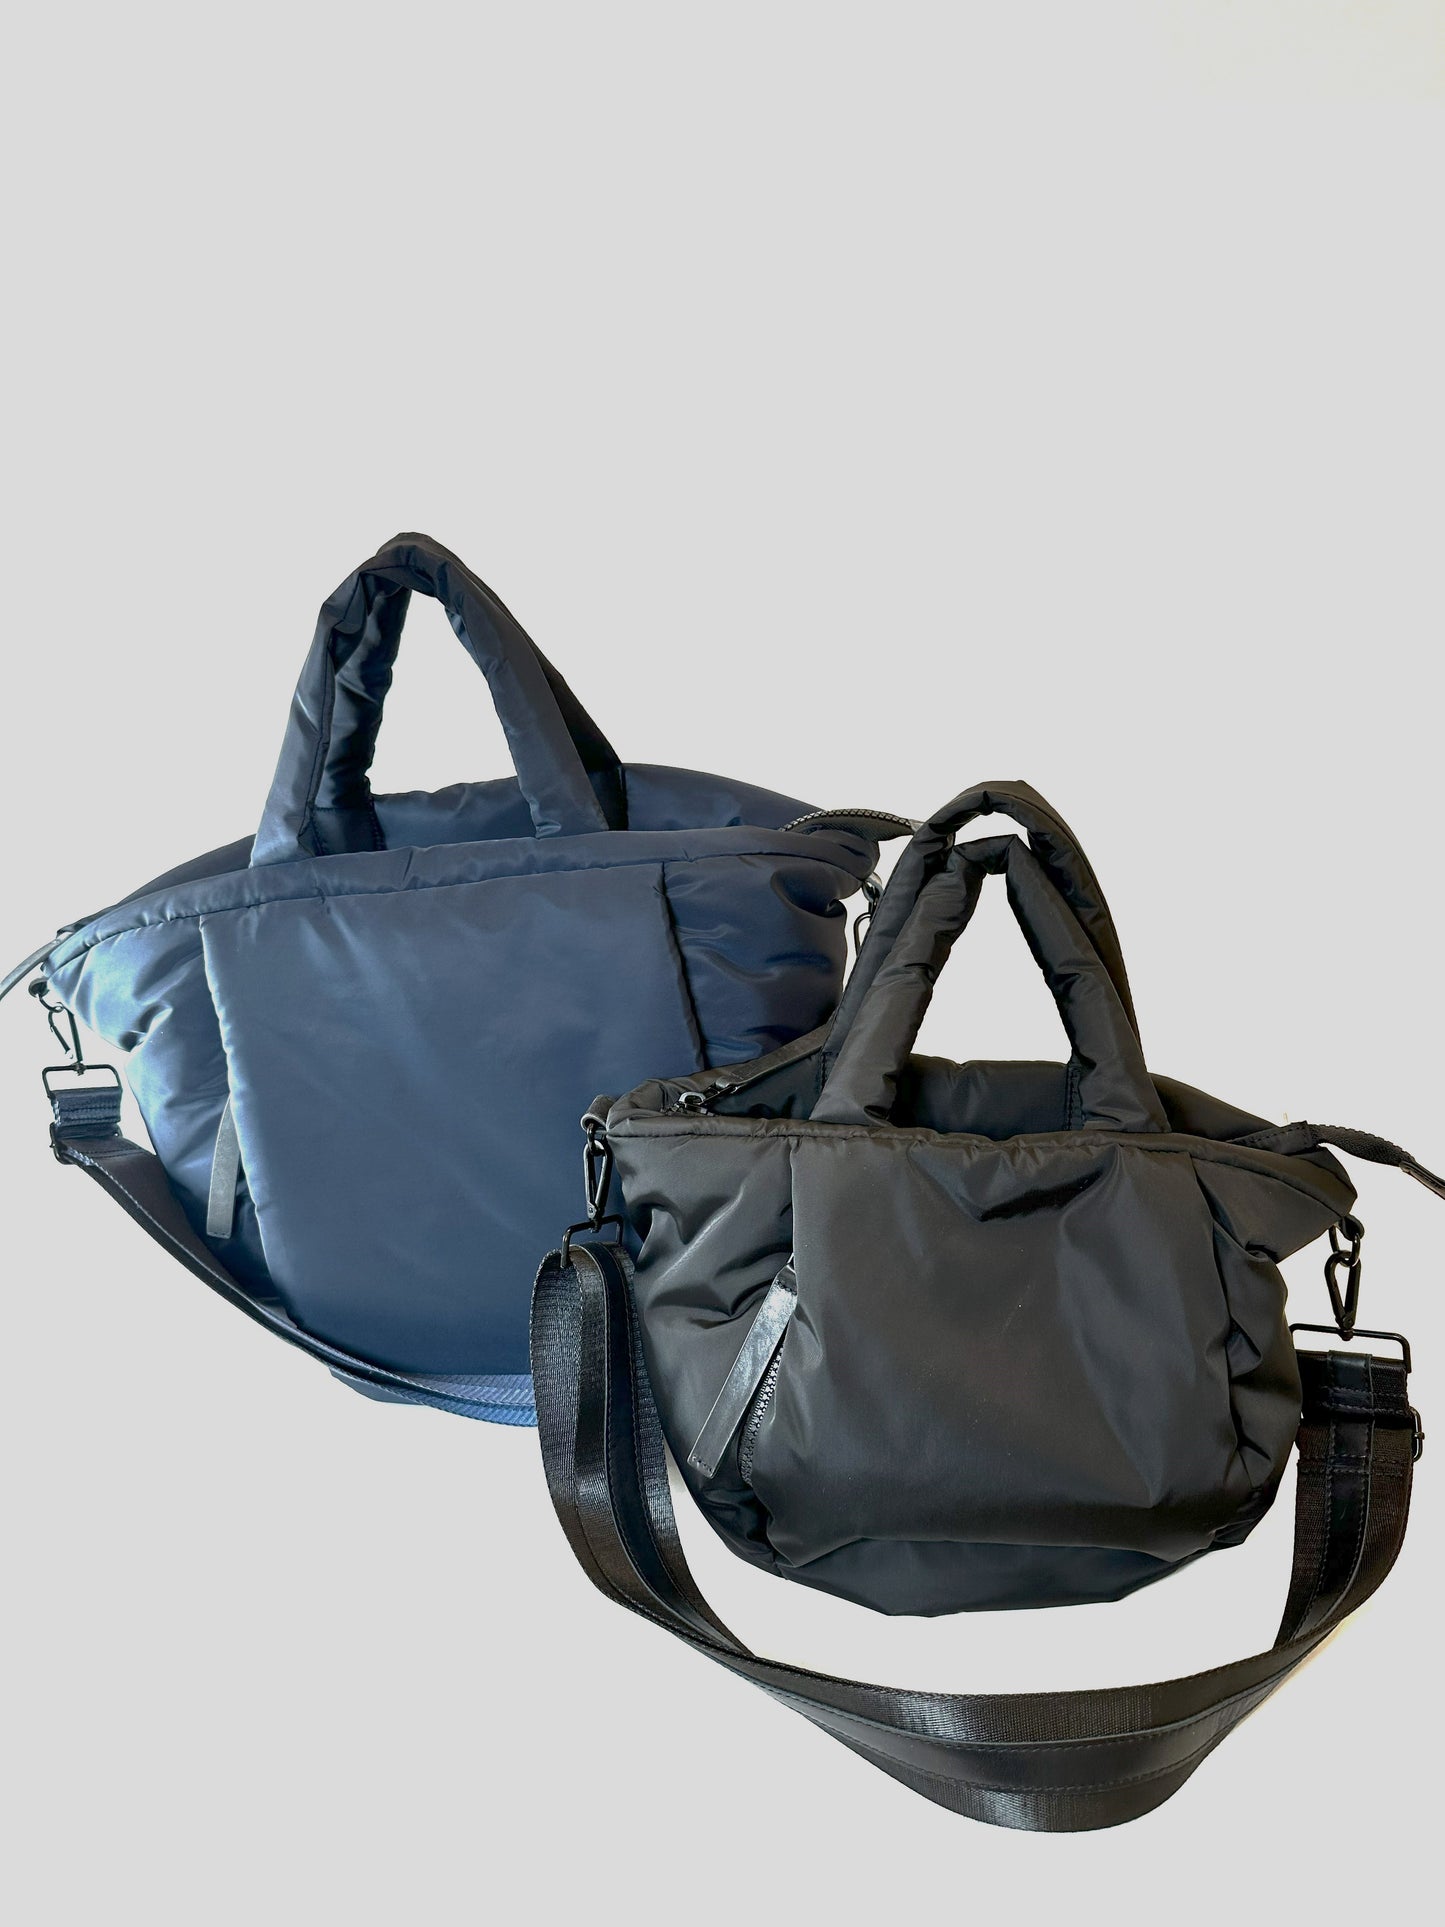 collection of 2 nylon puffy tote bags with crossbody strap: navy large and black medium